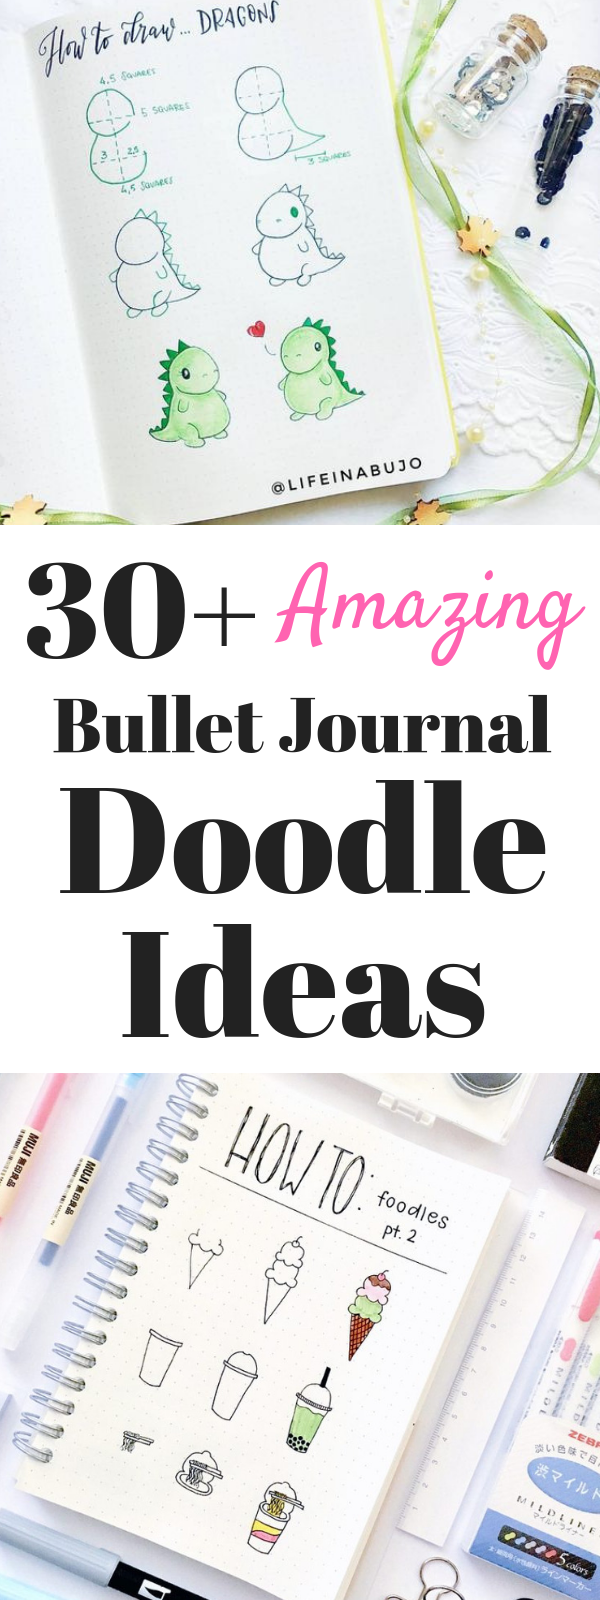 Easy Doodle Ideas for Your Bullet Journal